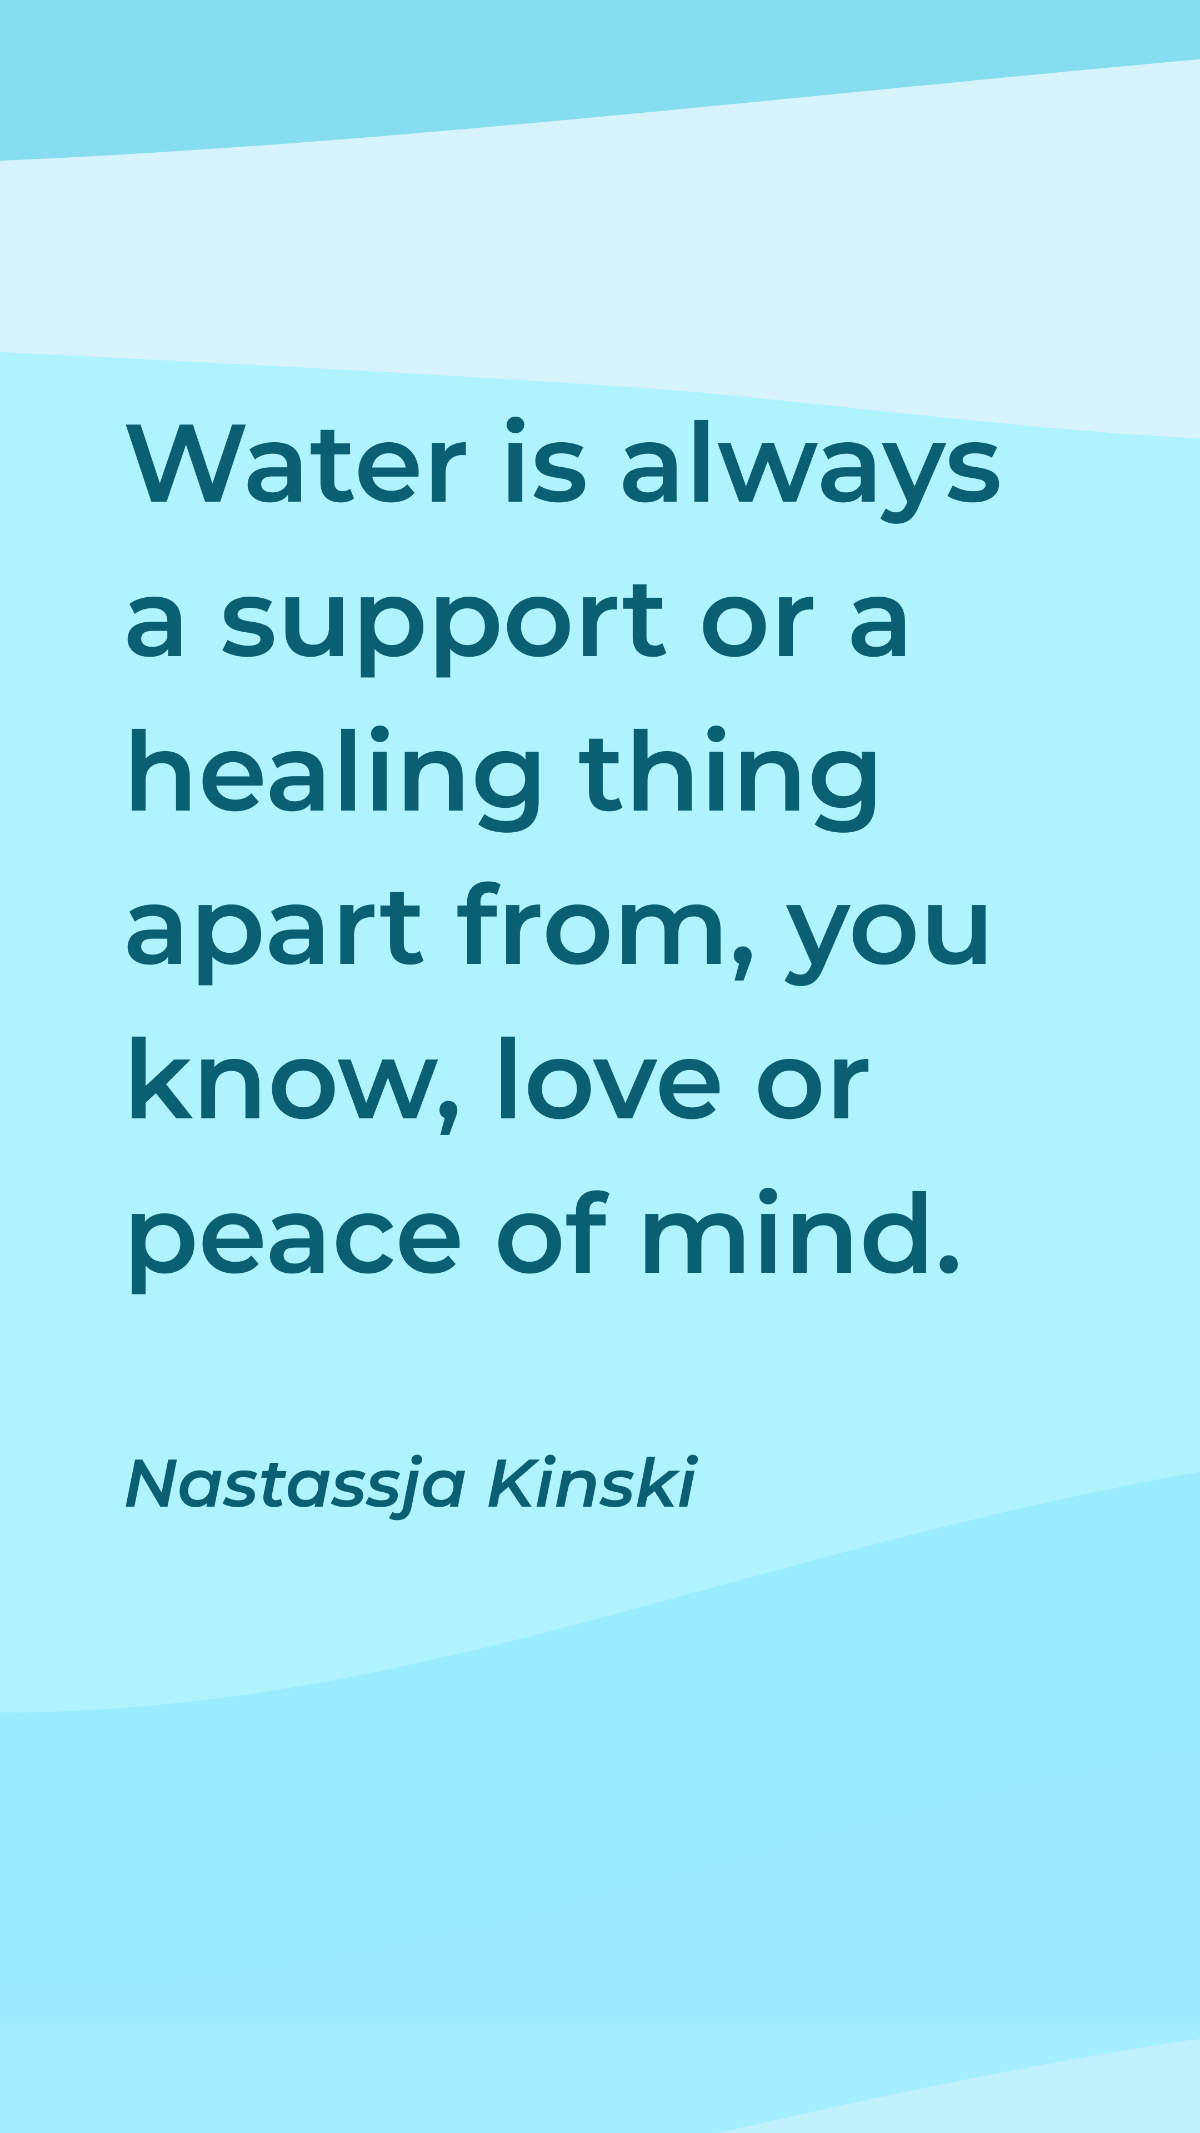 Free Nastassja Kinski - Water is always a support or a healing thing apart from, you know, love or peace of mind. Template